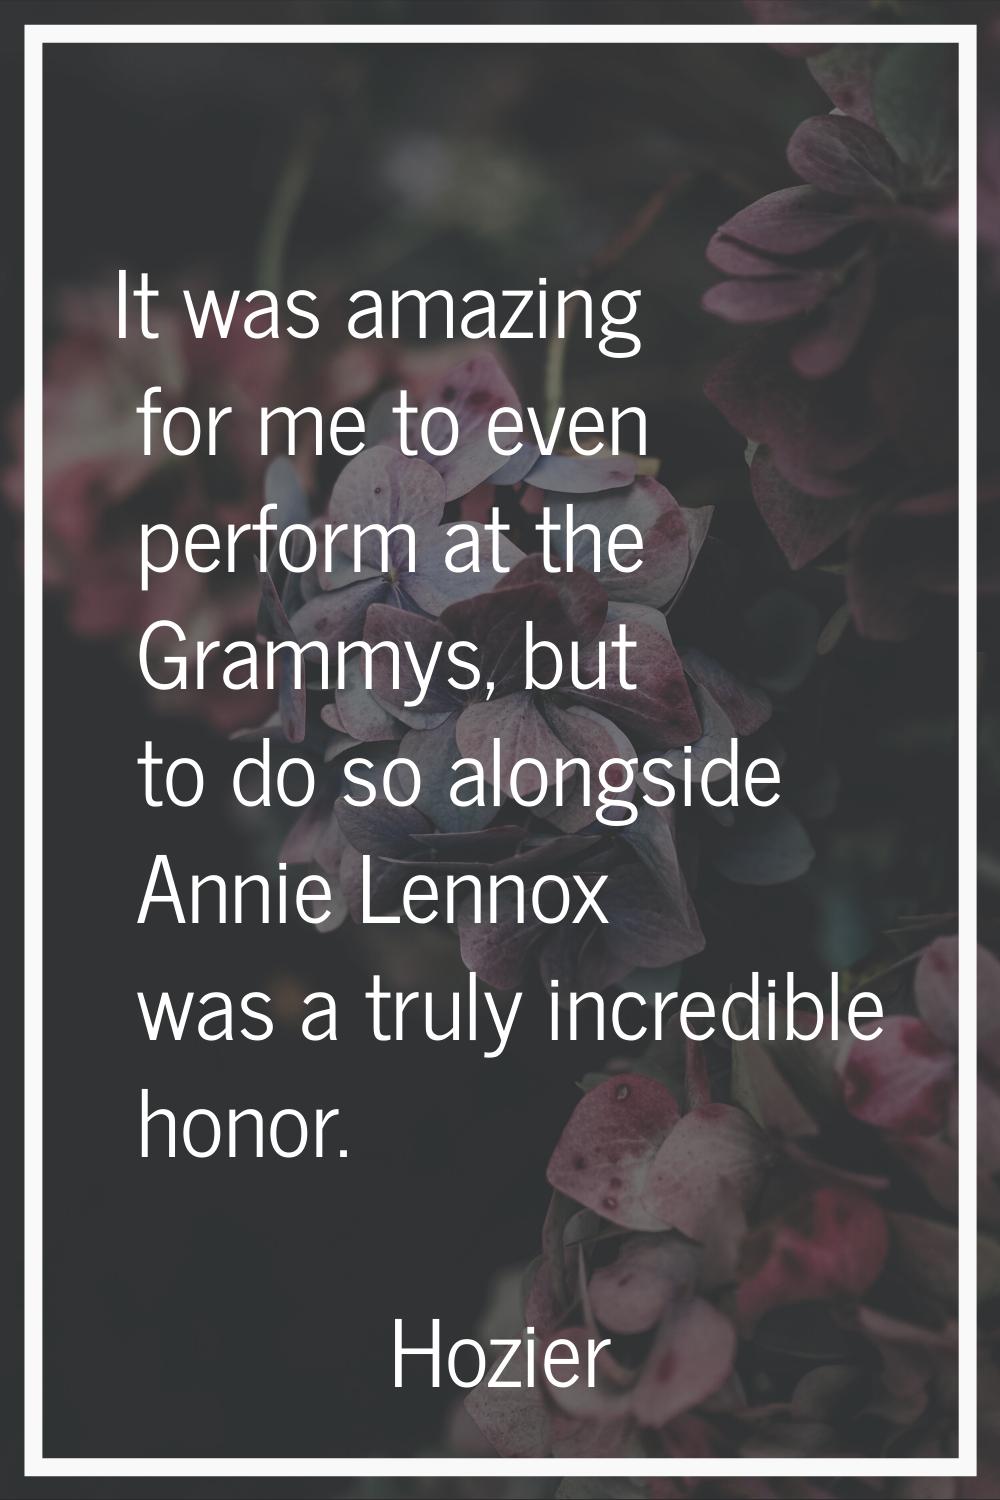 It was amazing for me to even perform at the Grammys, but to do so alongside Annie Lennox was a tru